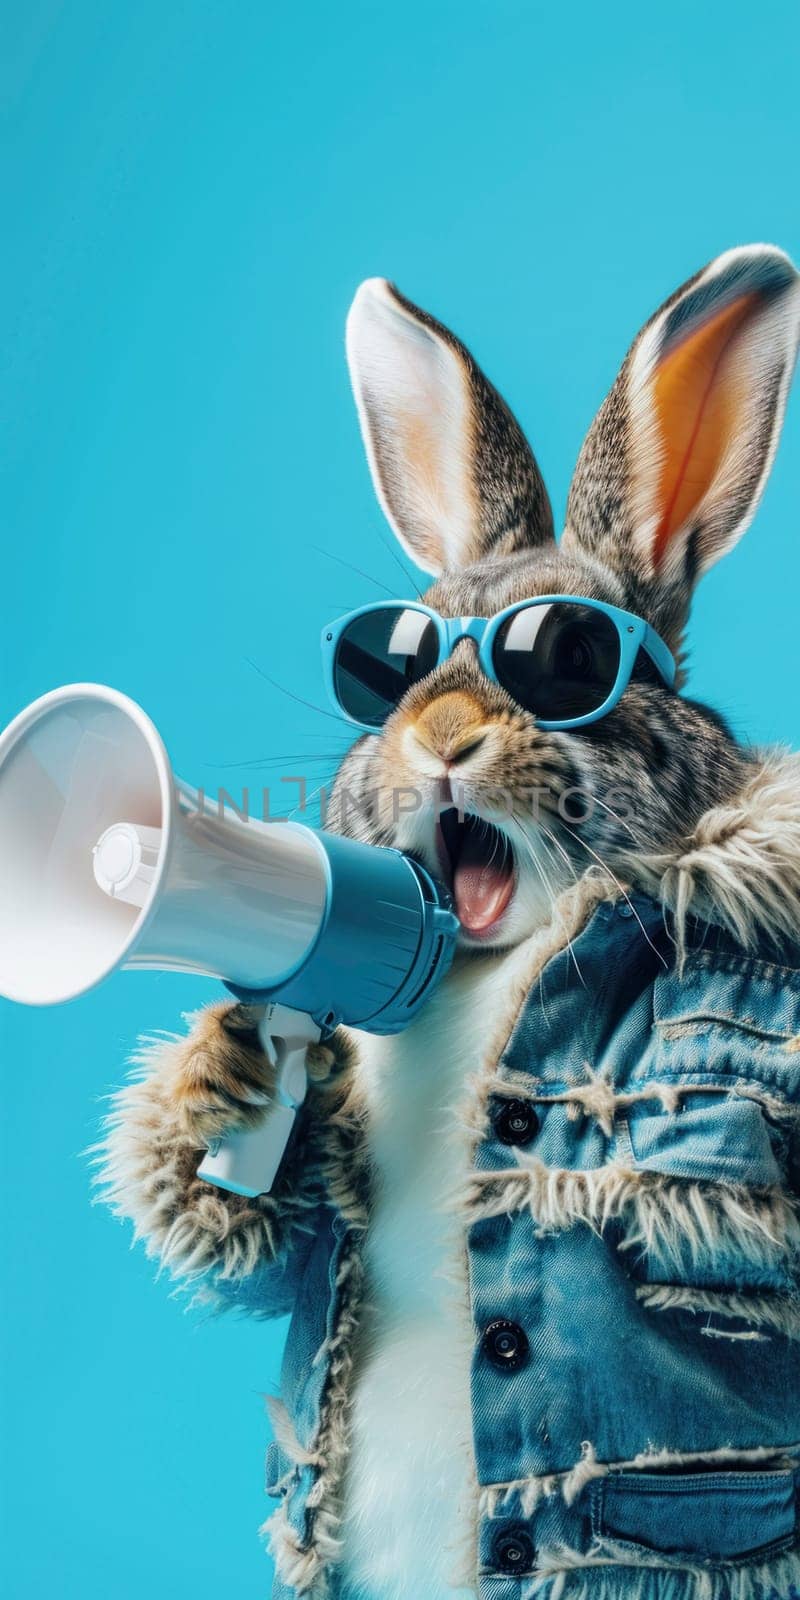 Cool bunny in sunglasses with megaphone on blue background. Easter vertical banner for smartphone